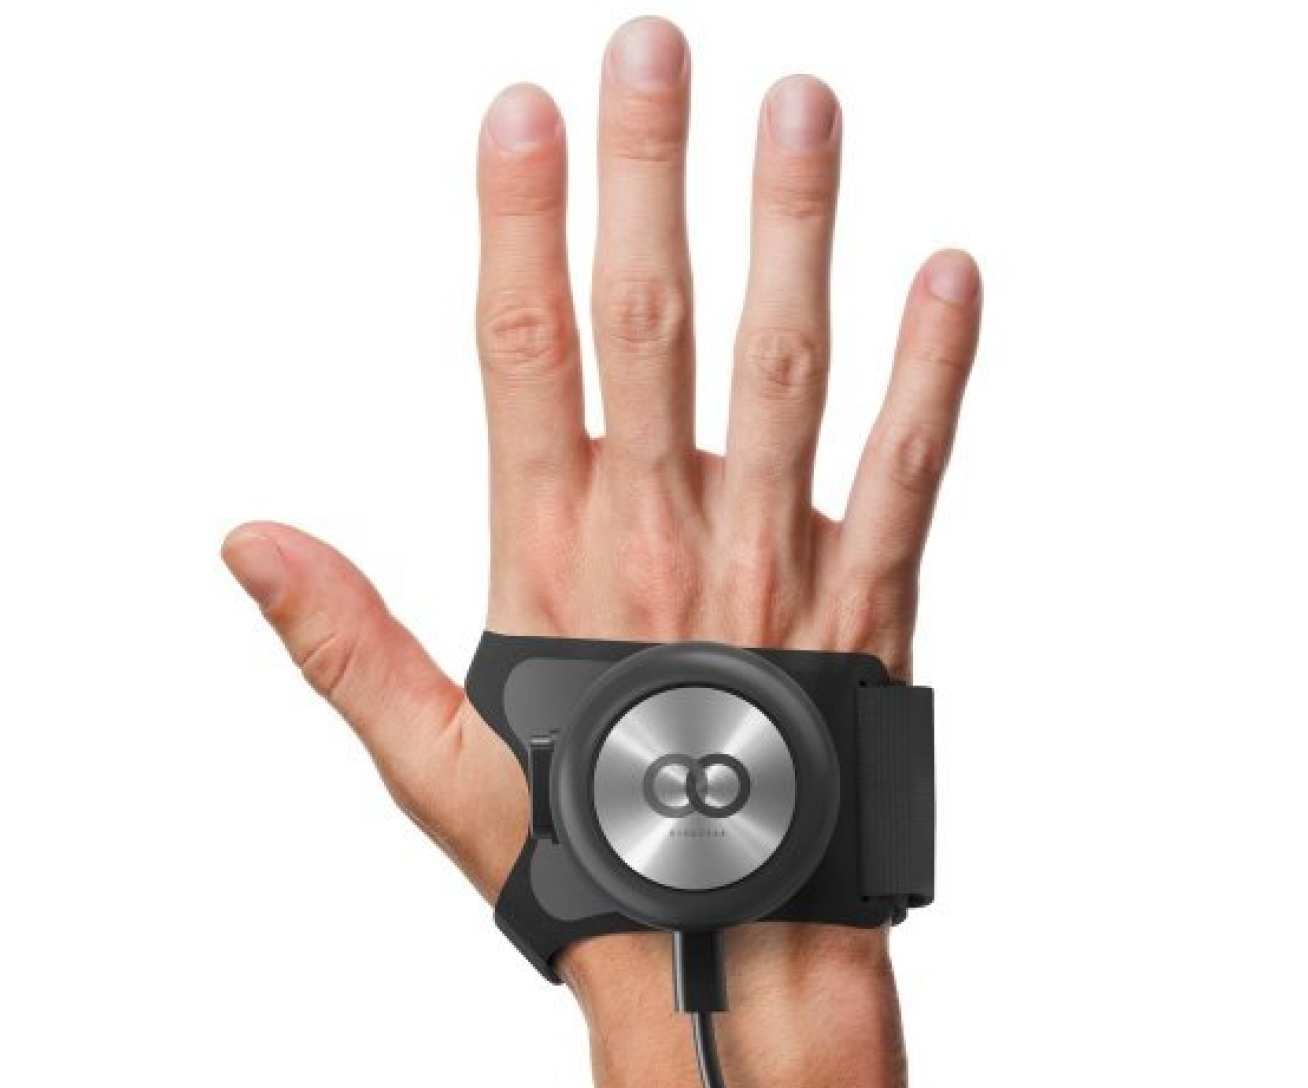 Hand-stabilising glove developed by GyroGear